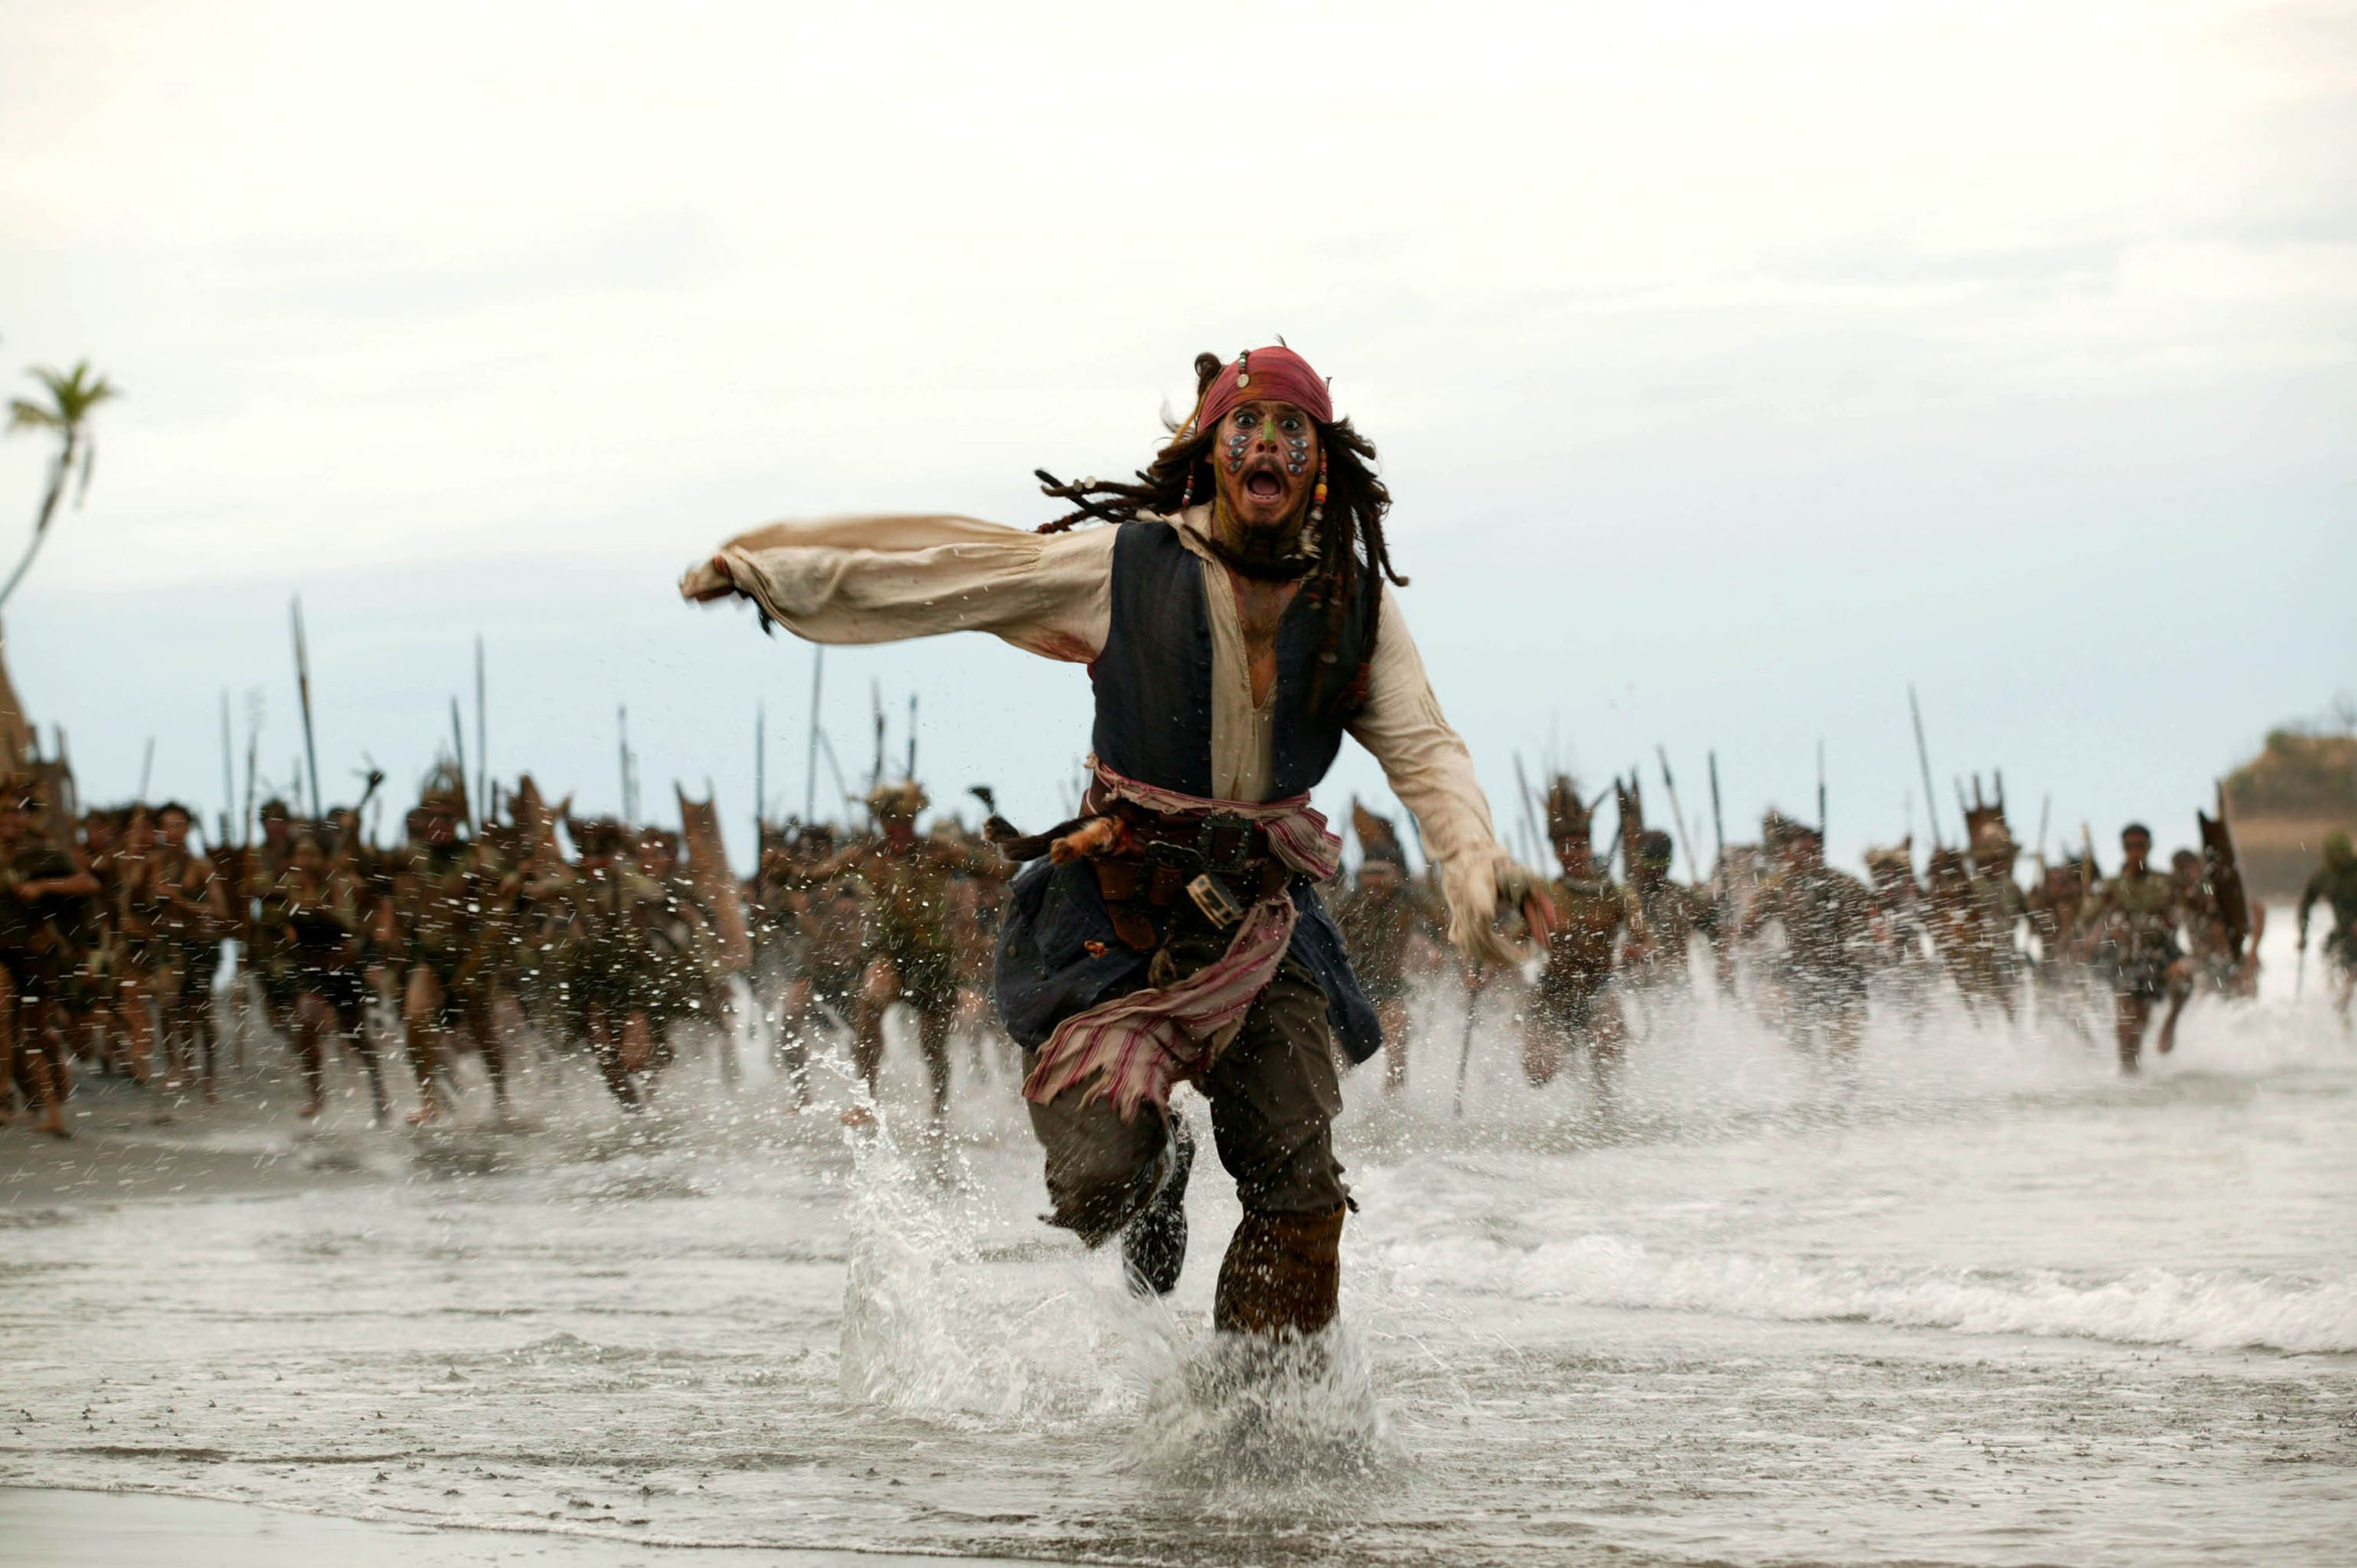 android johnny depp, jack sparrow, pirates of the caribbean, pirates of the caribbean: dead man's chest, movie